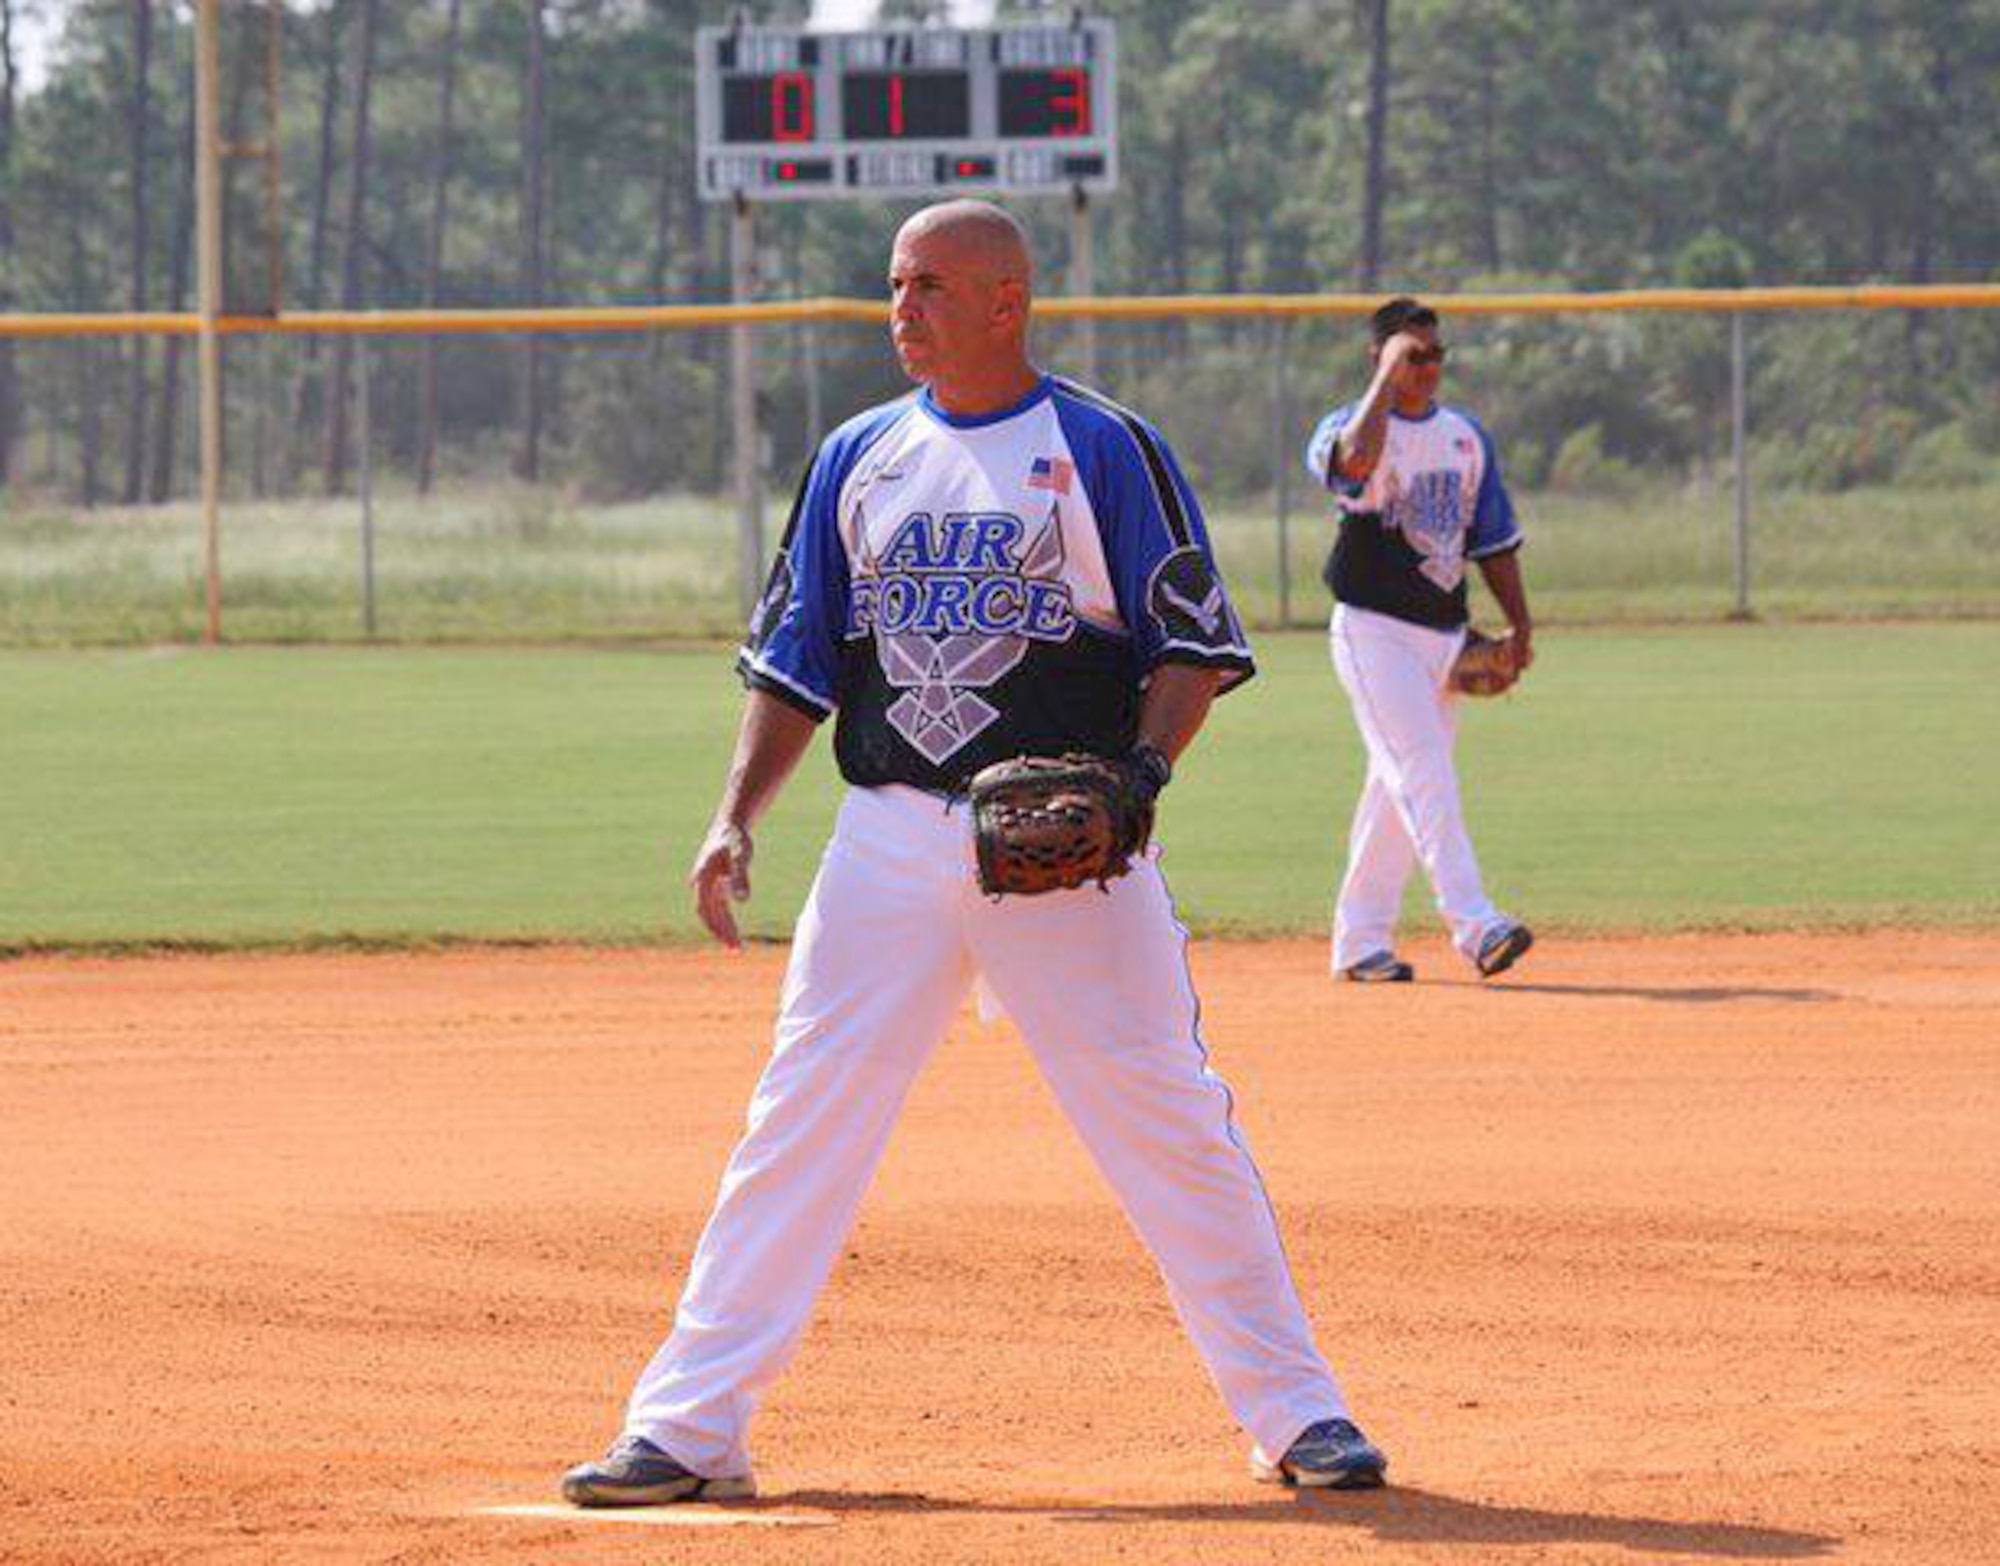 Master Sgt. Tony Patrick, 4th Equipment Maintenance Squadron NCO in charge of munitions inspections, warms up prior to an Air Force men's softball game. Patrick typically pitches for his teams but also plays shortstop. (Courtesy Photo)